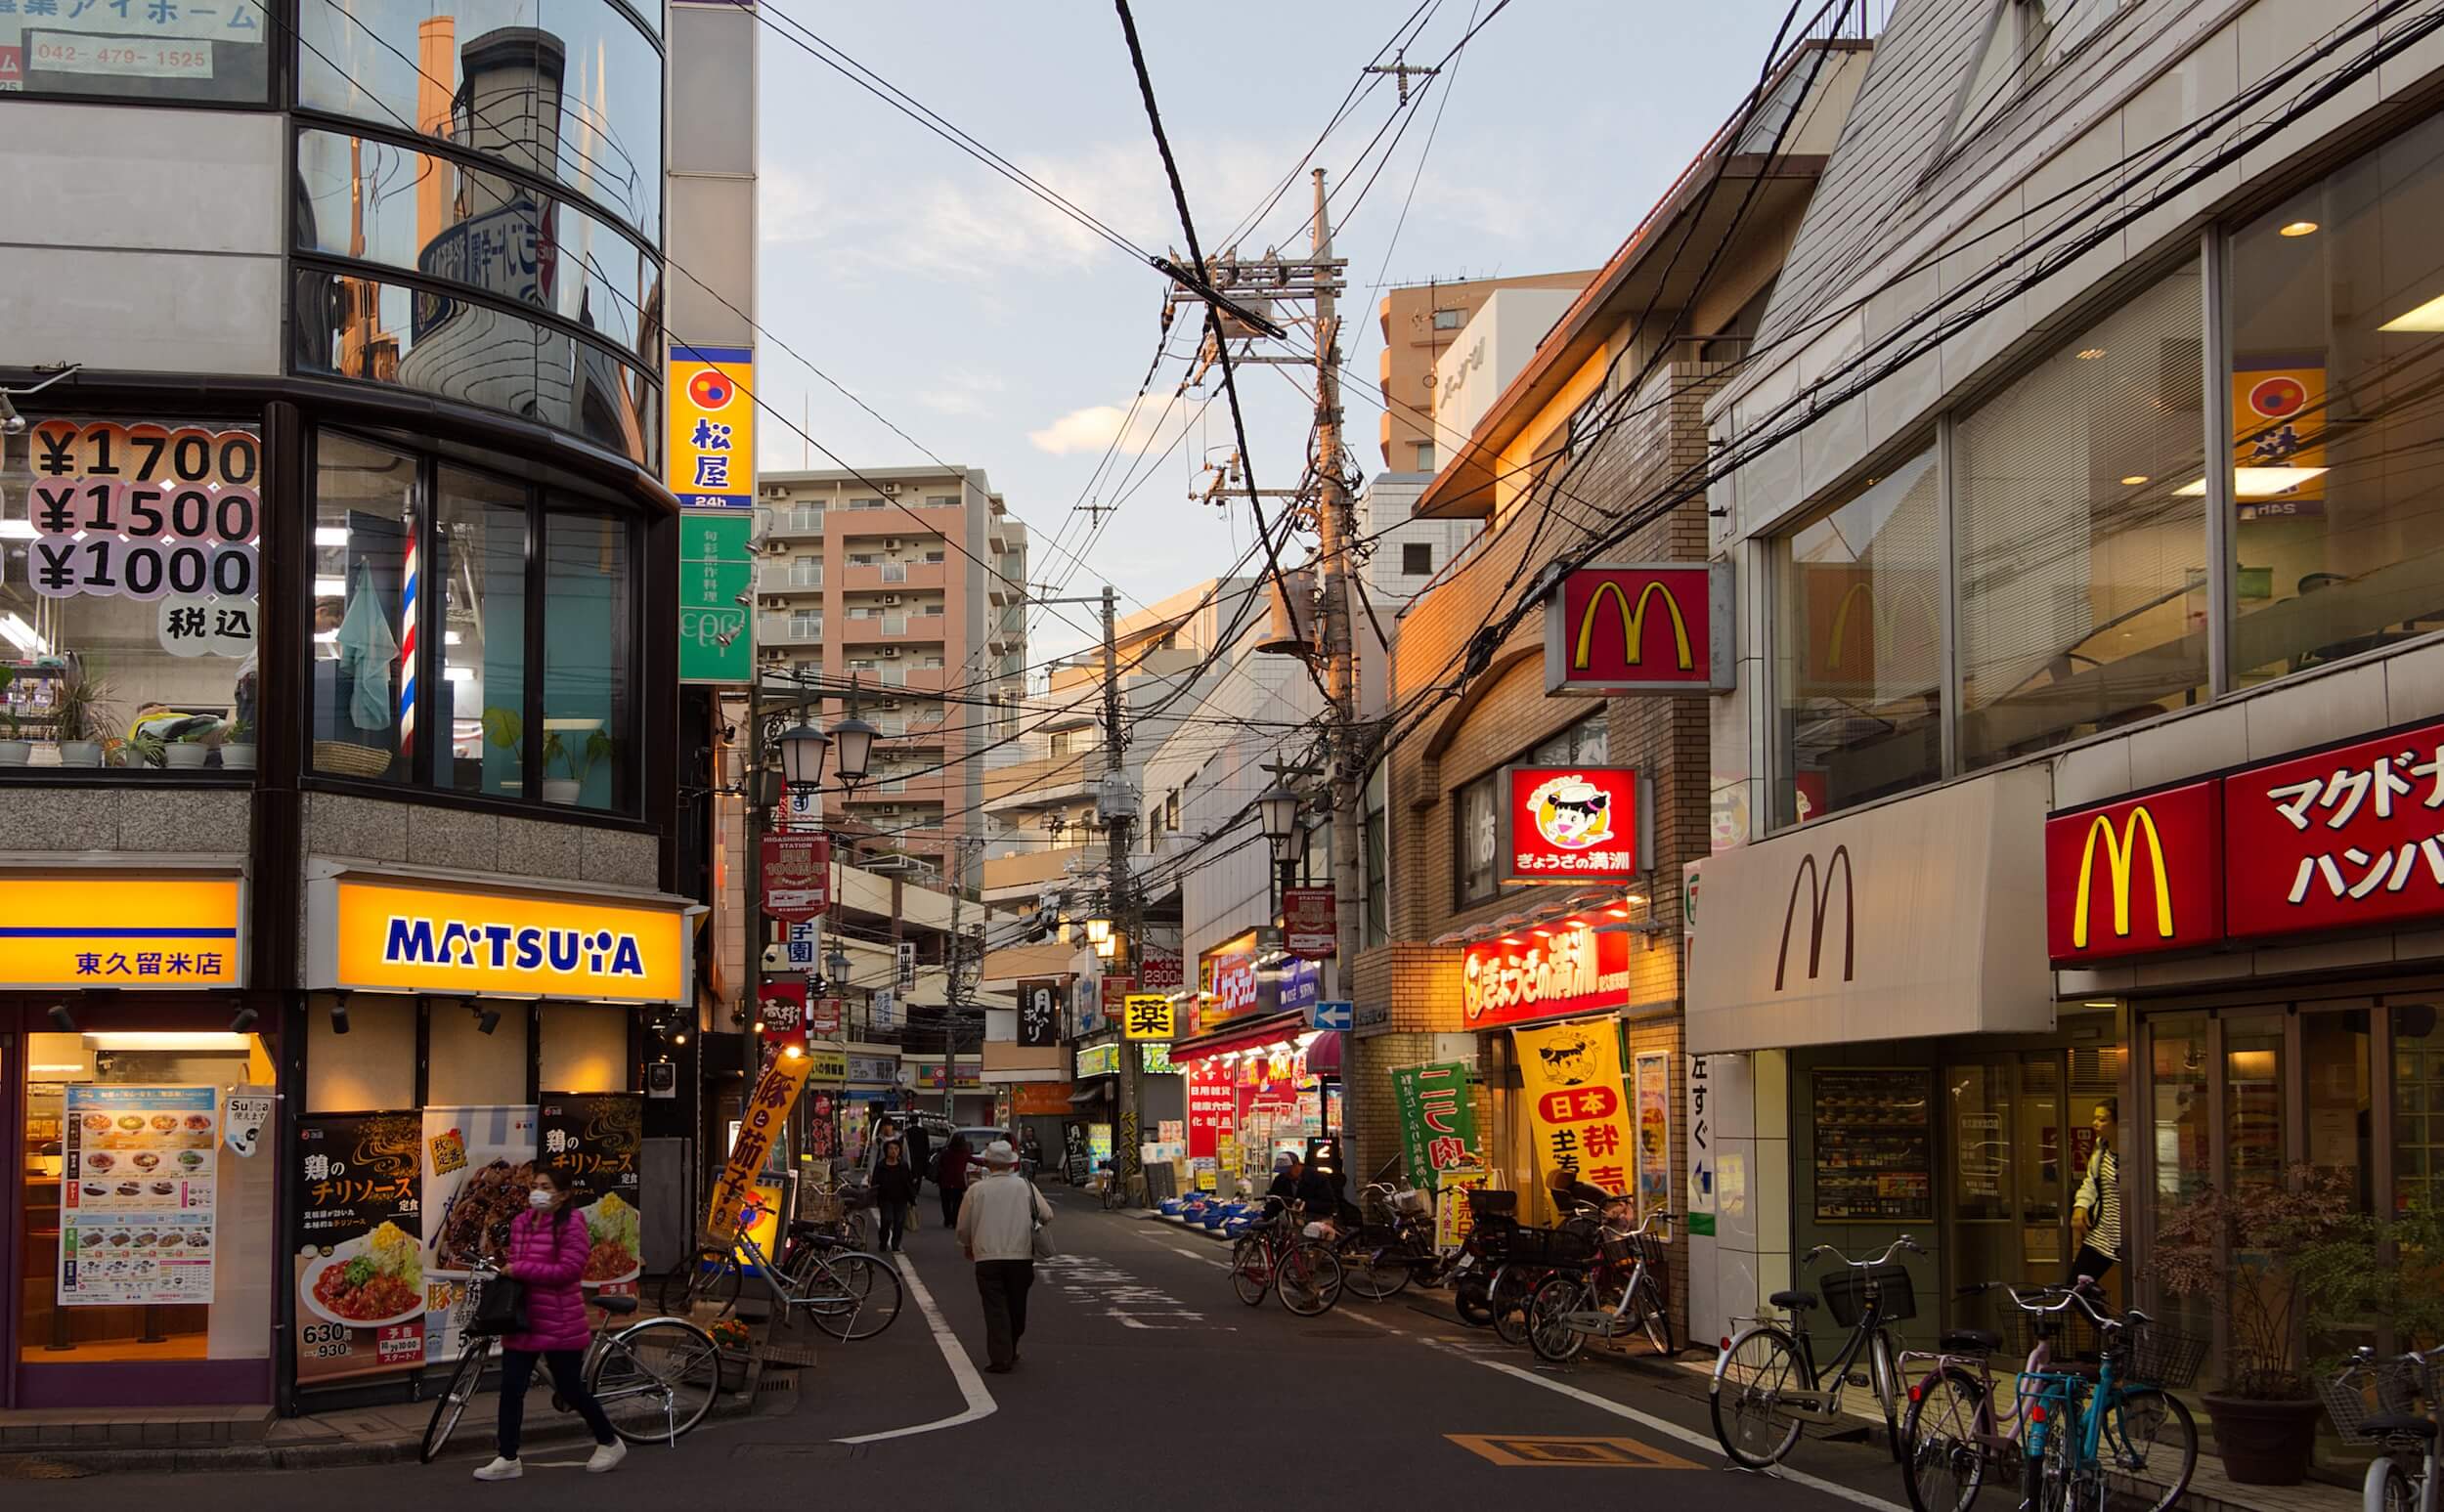 A street at sunset. In the foreground a Matsuya restaurant is illuminated. On the opposite side of the street is a McDonalds. An older man walks away down the middle of the road